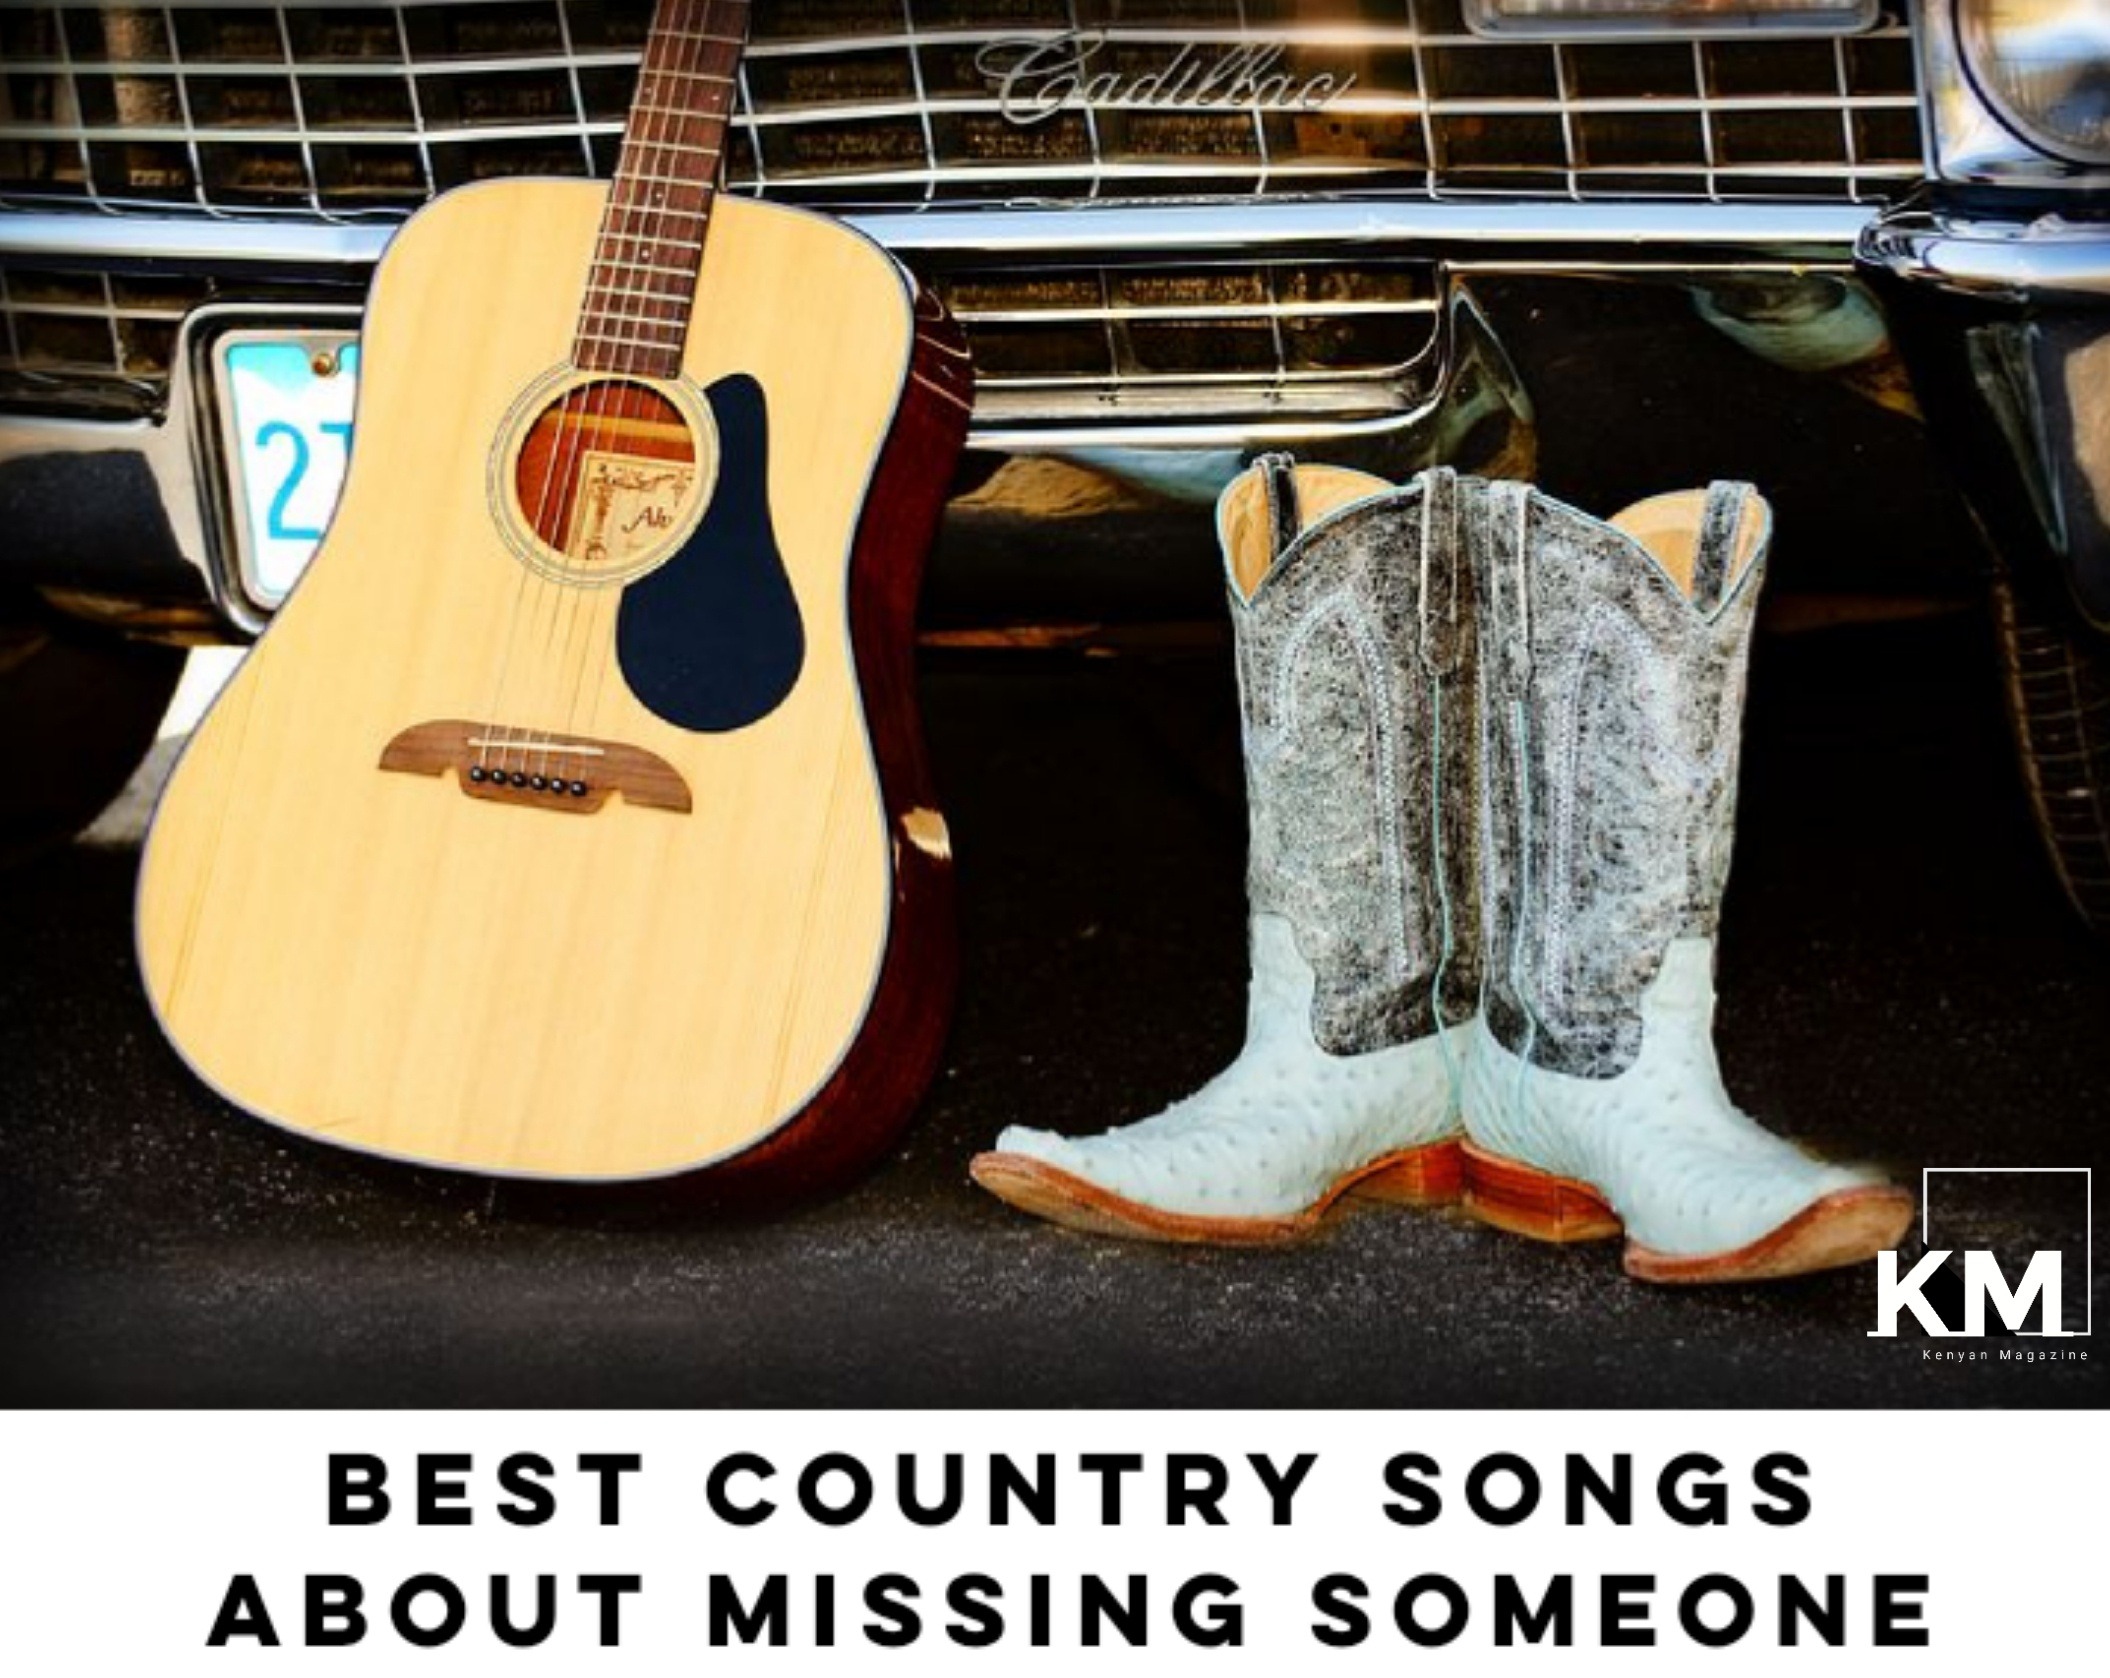 Country songs for when you're missing someone